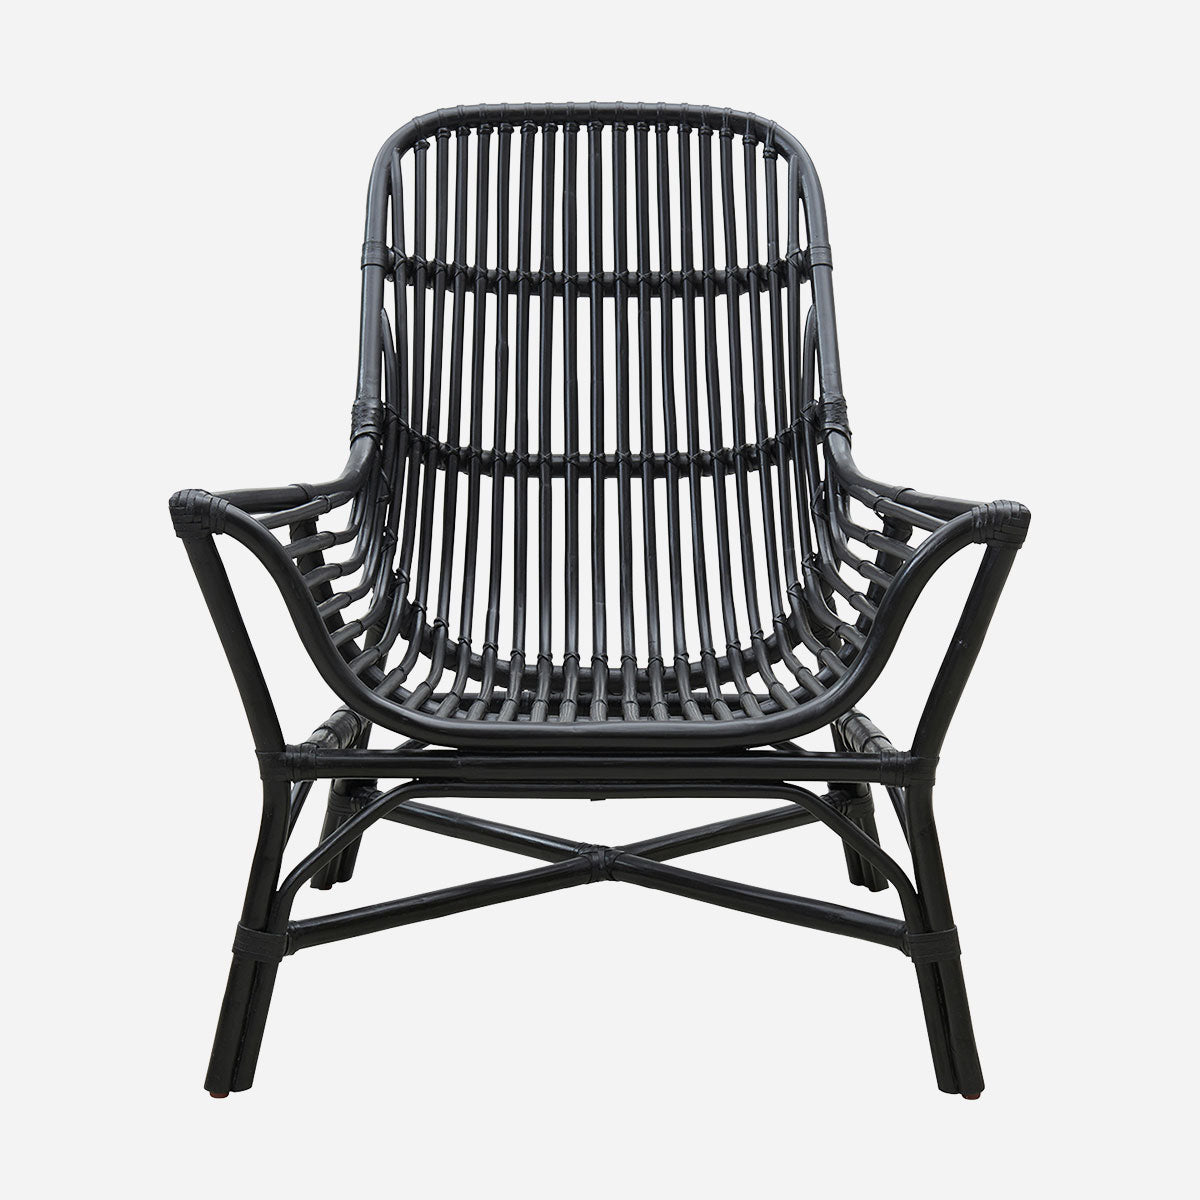 Lounge chair, Colony, Black House Doctor